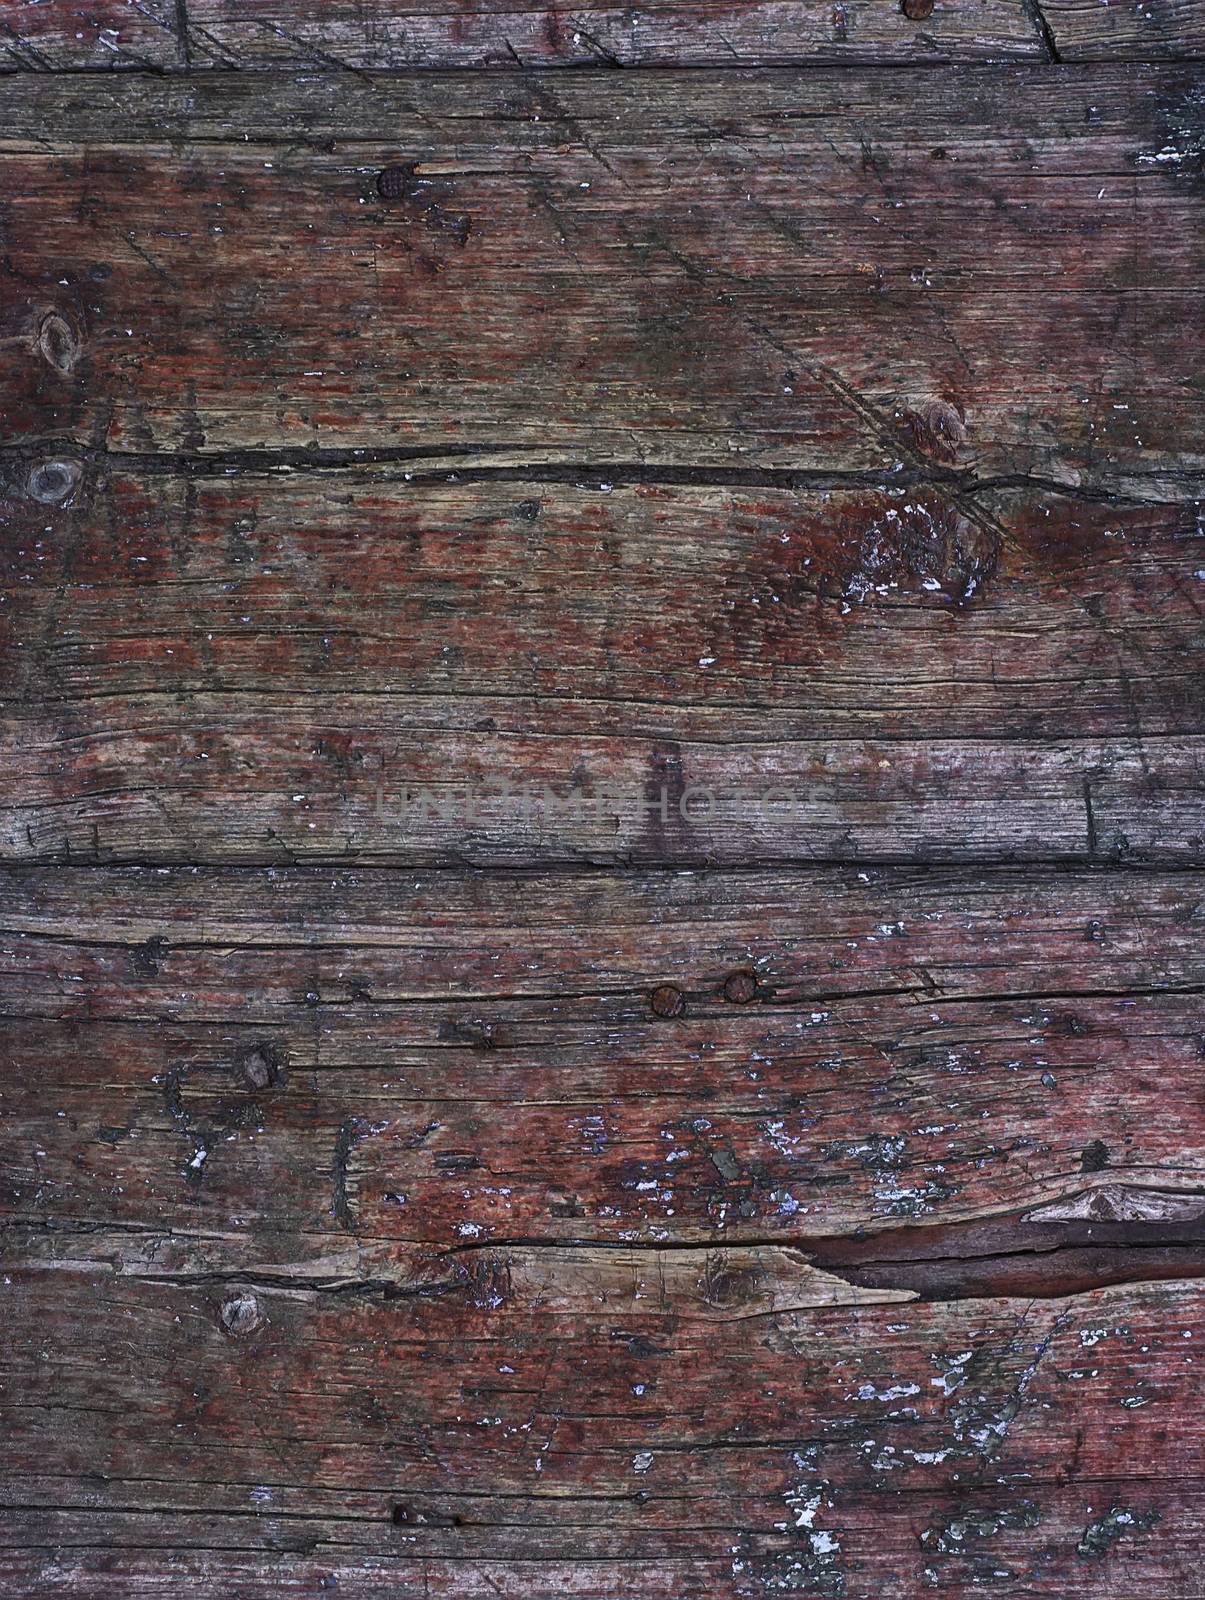 Texture of old wood by LMykola